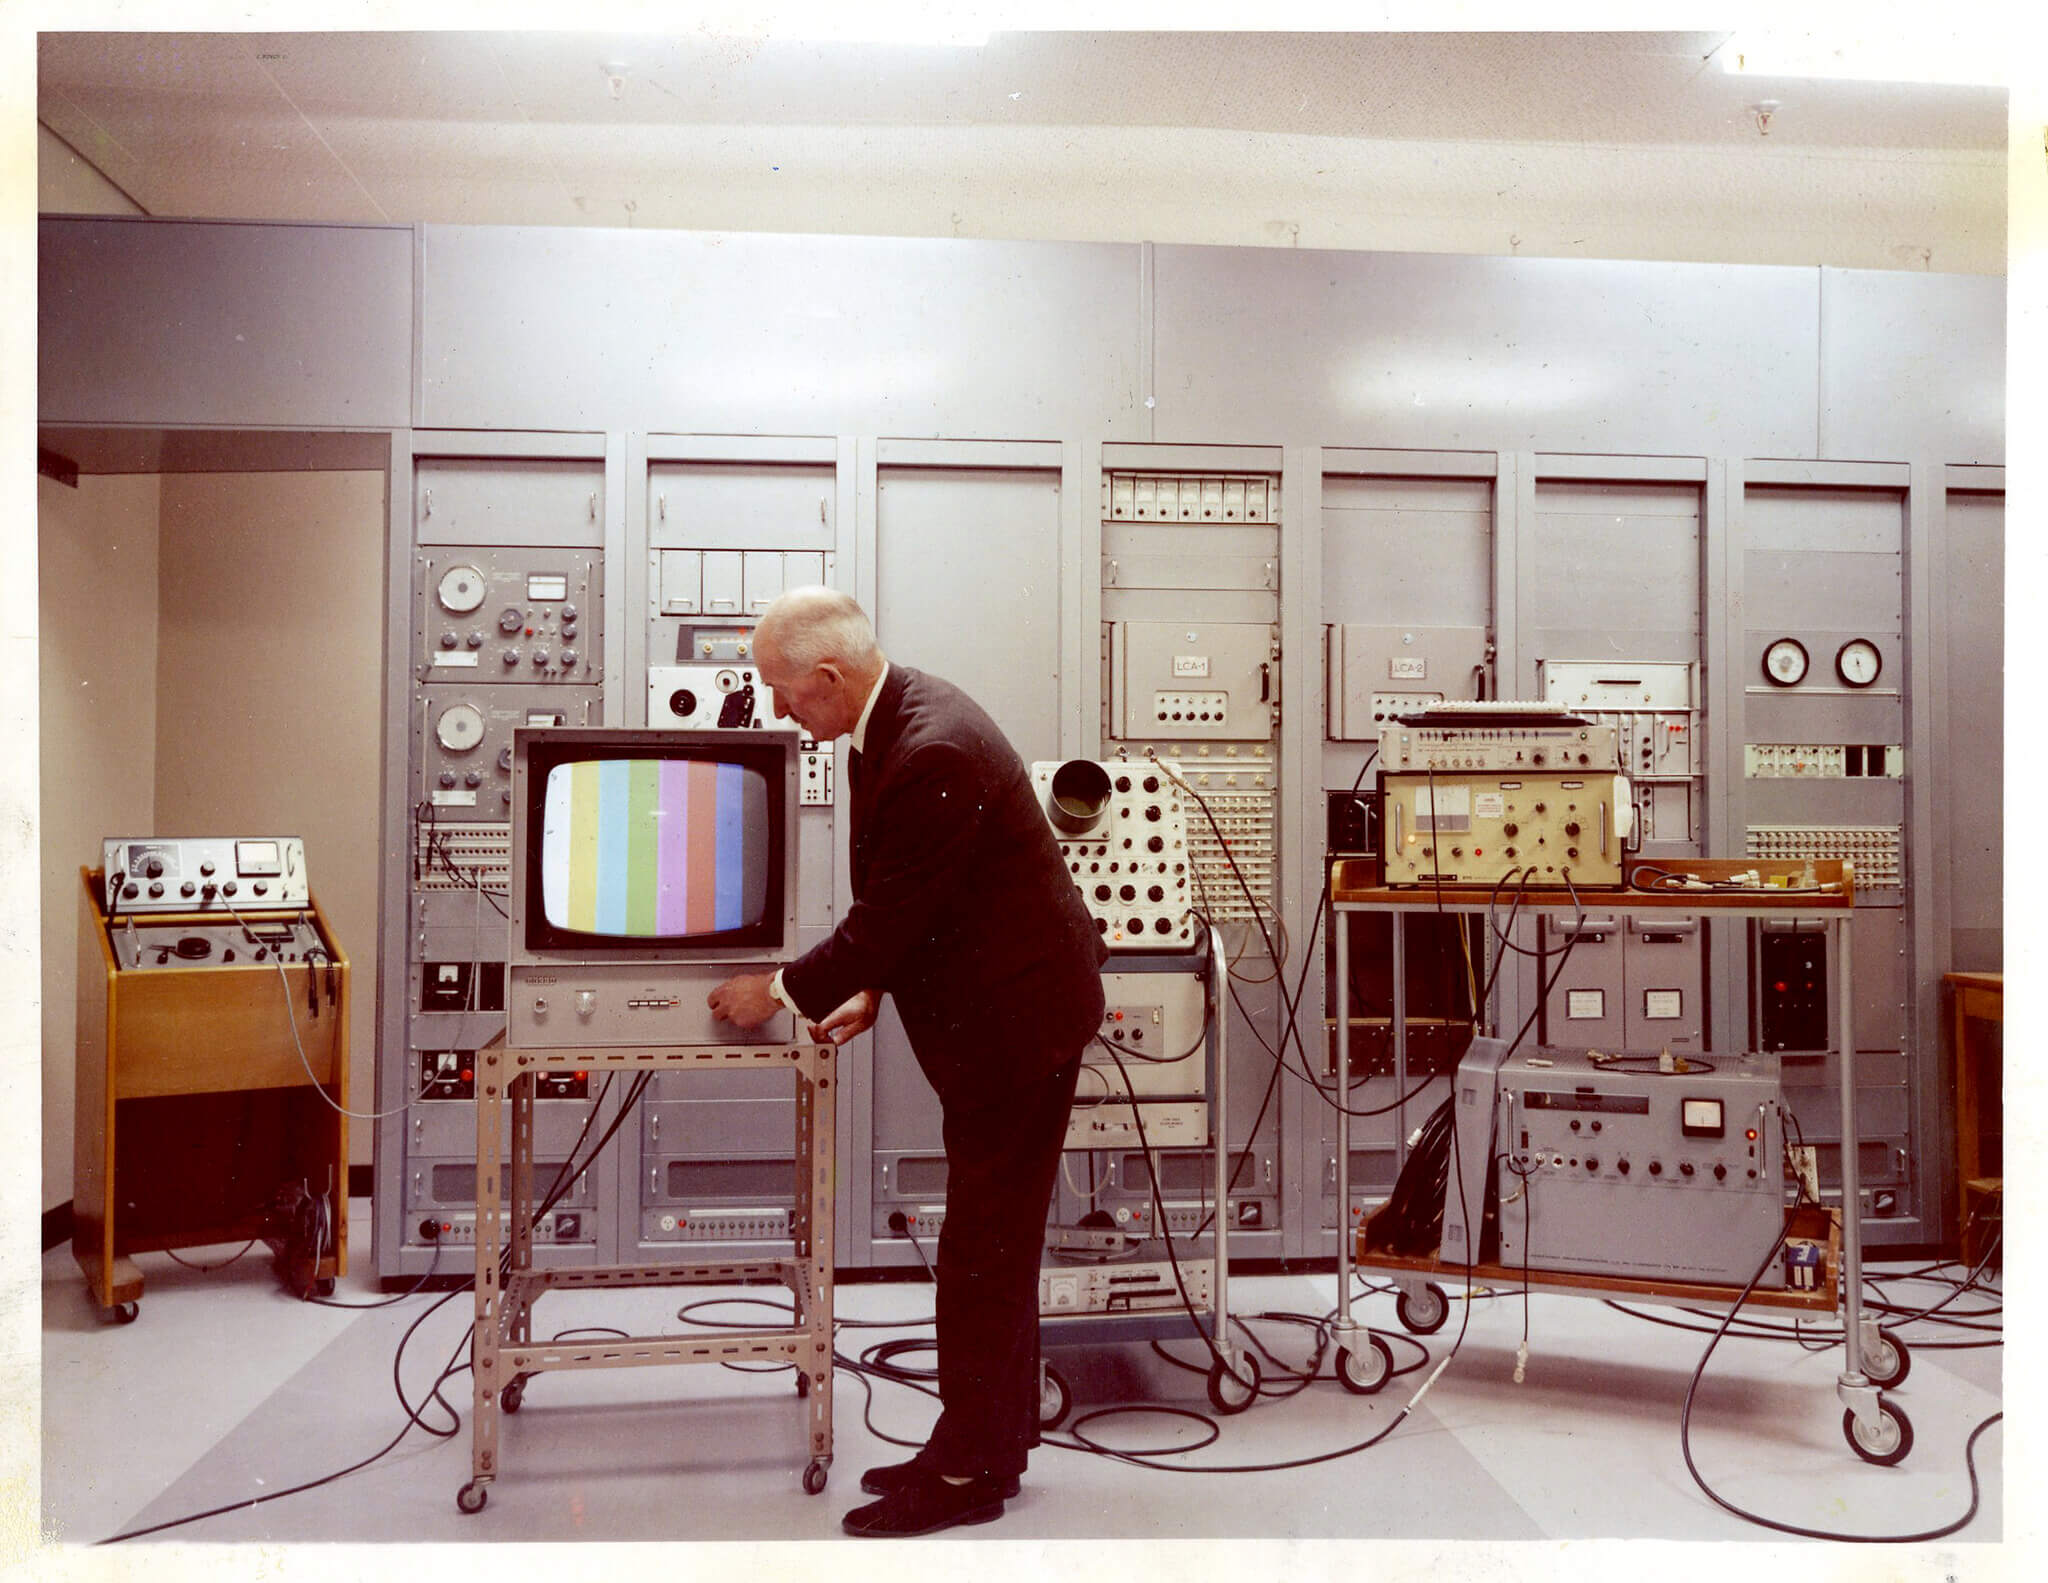 New Zealand’s first official television transmission was broadcast on Auckland’s Channel Two in 1960. Archives New Zealand - Flickr